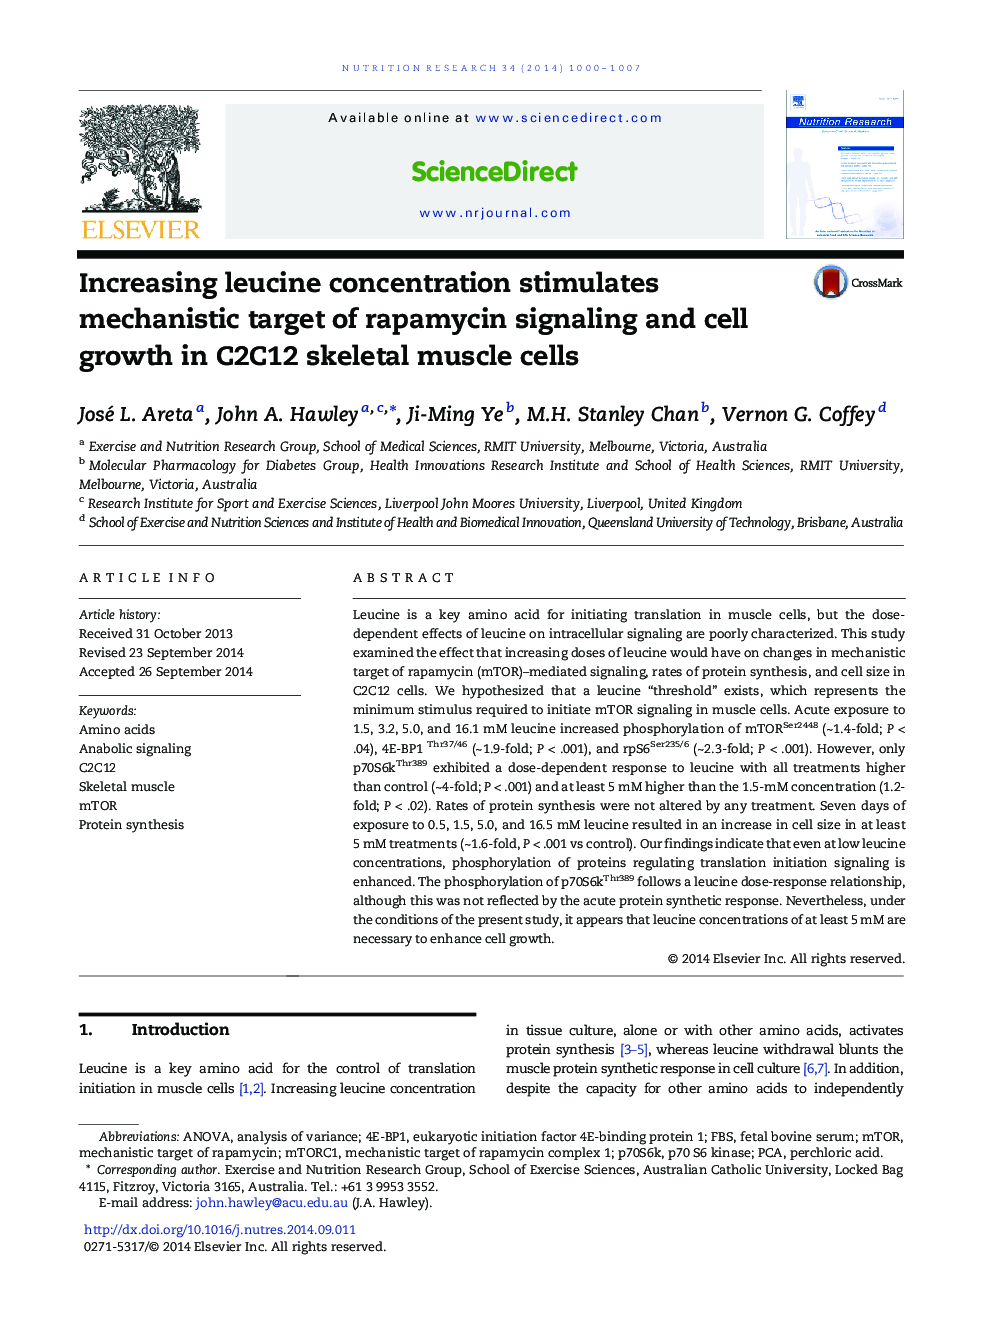 Increasing leucine concentration stimulates mechanistic target of rapamycin signaling and cell growth in C2C12 skeletal muscle cells